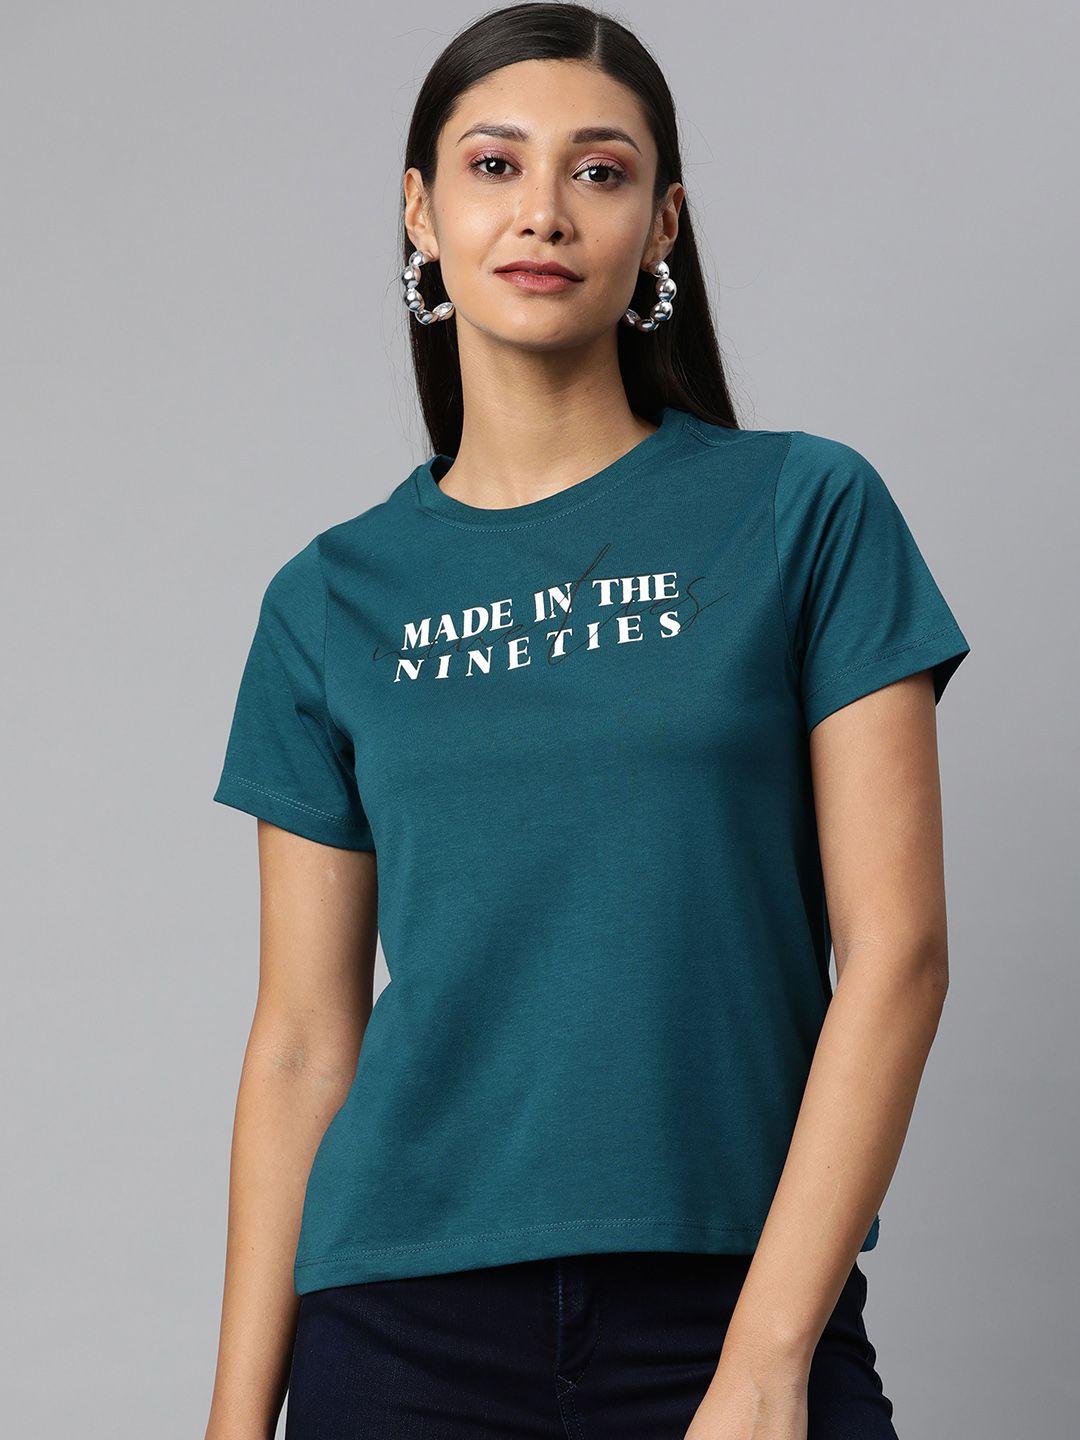 provogue women teal green & white typography printed t-shirt